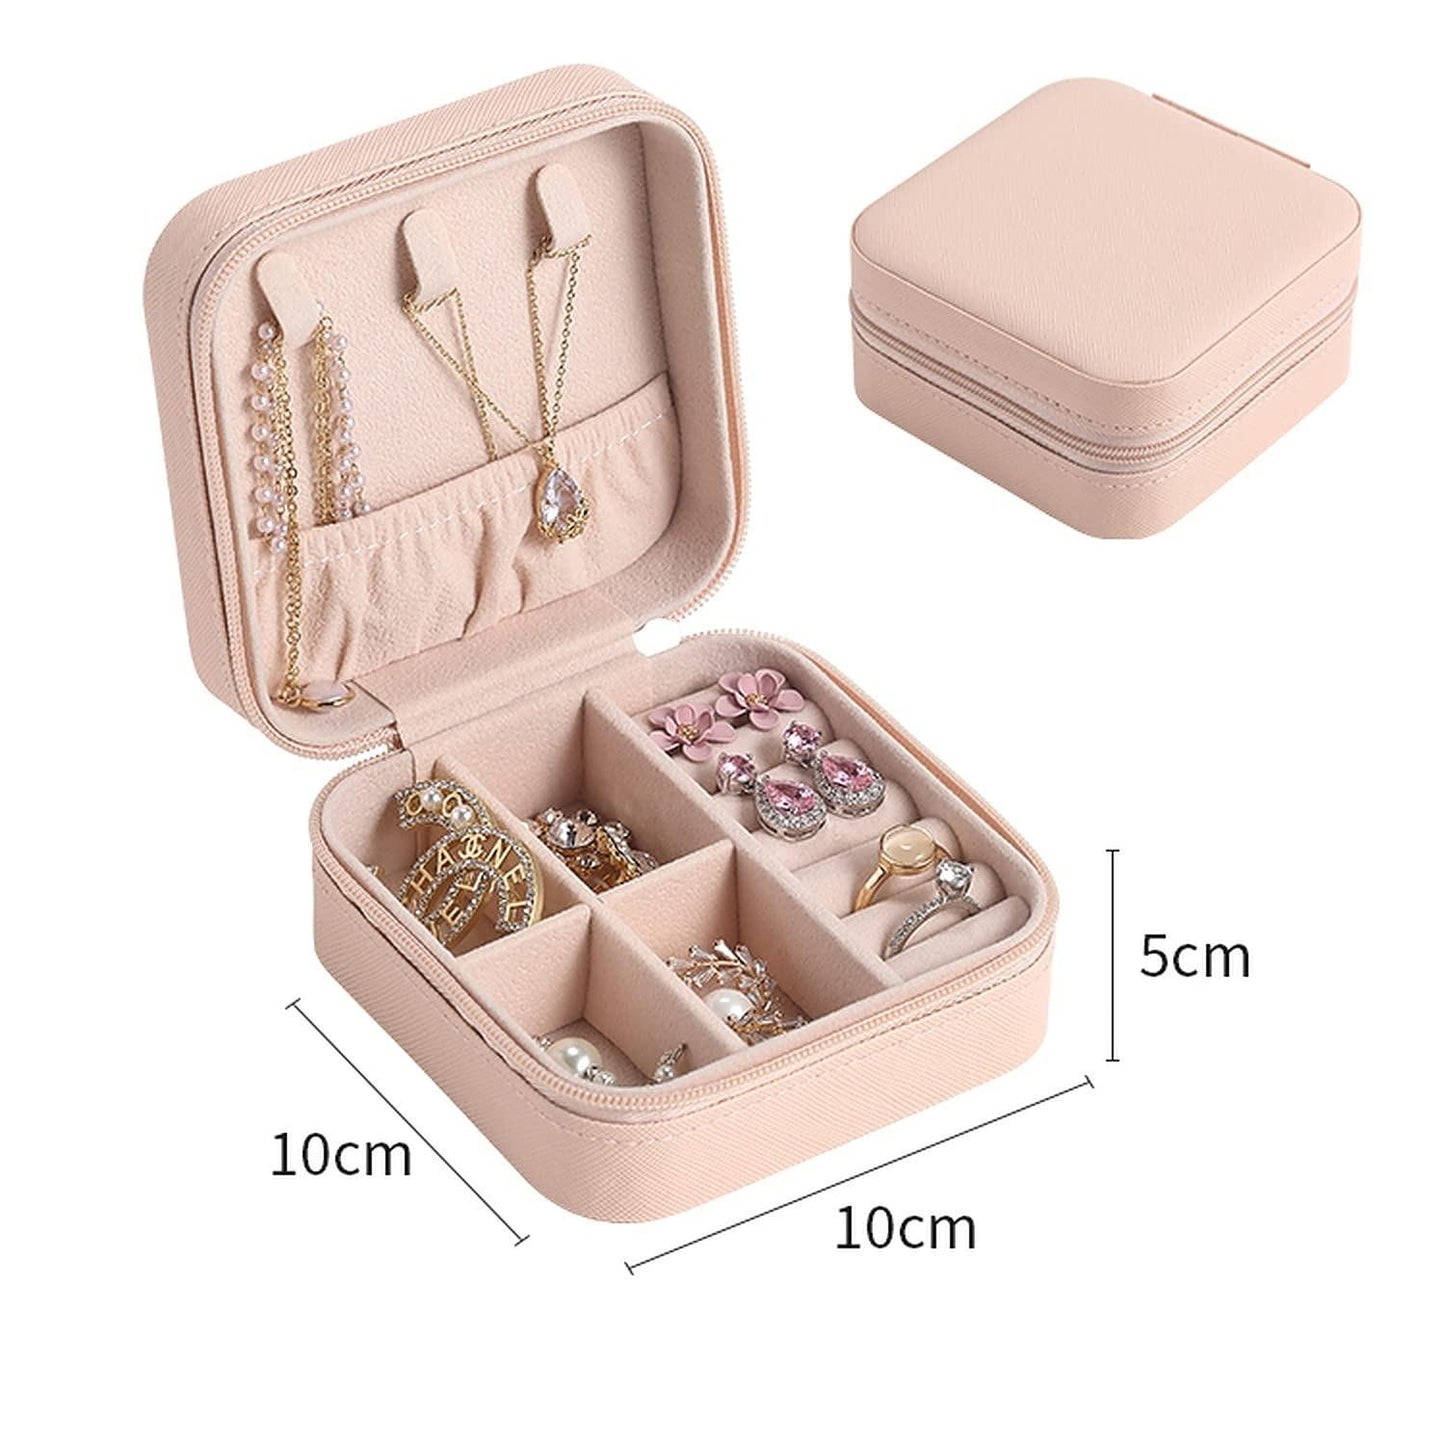 HOME BOX- "Travel Jewelry Organizer": Portable Pouch (Assorted Colors)